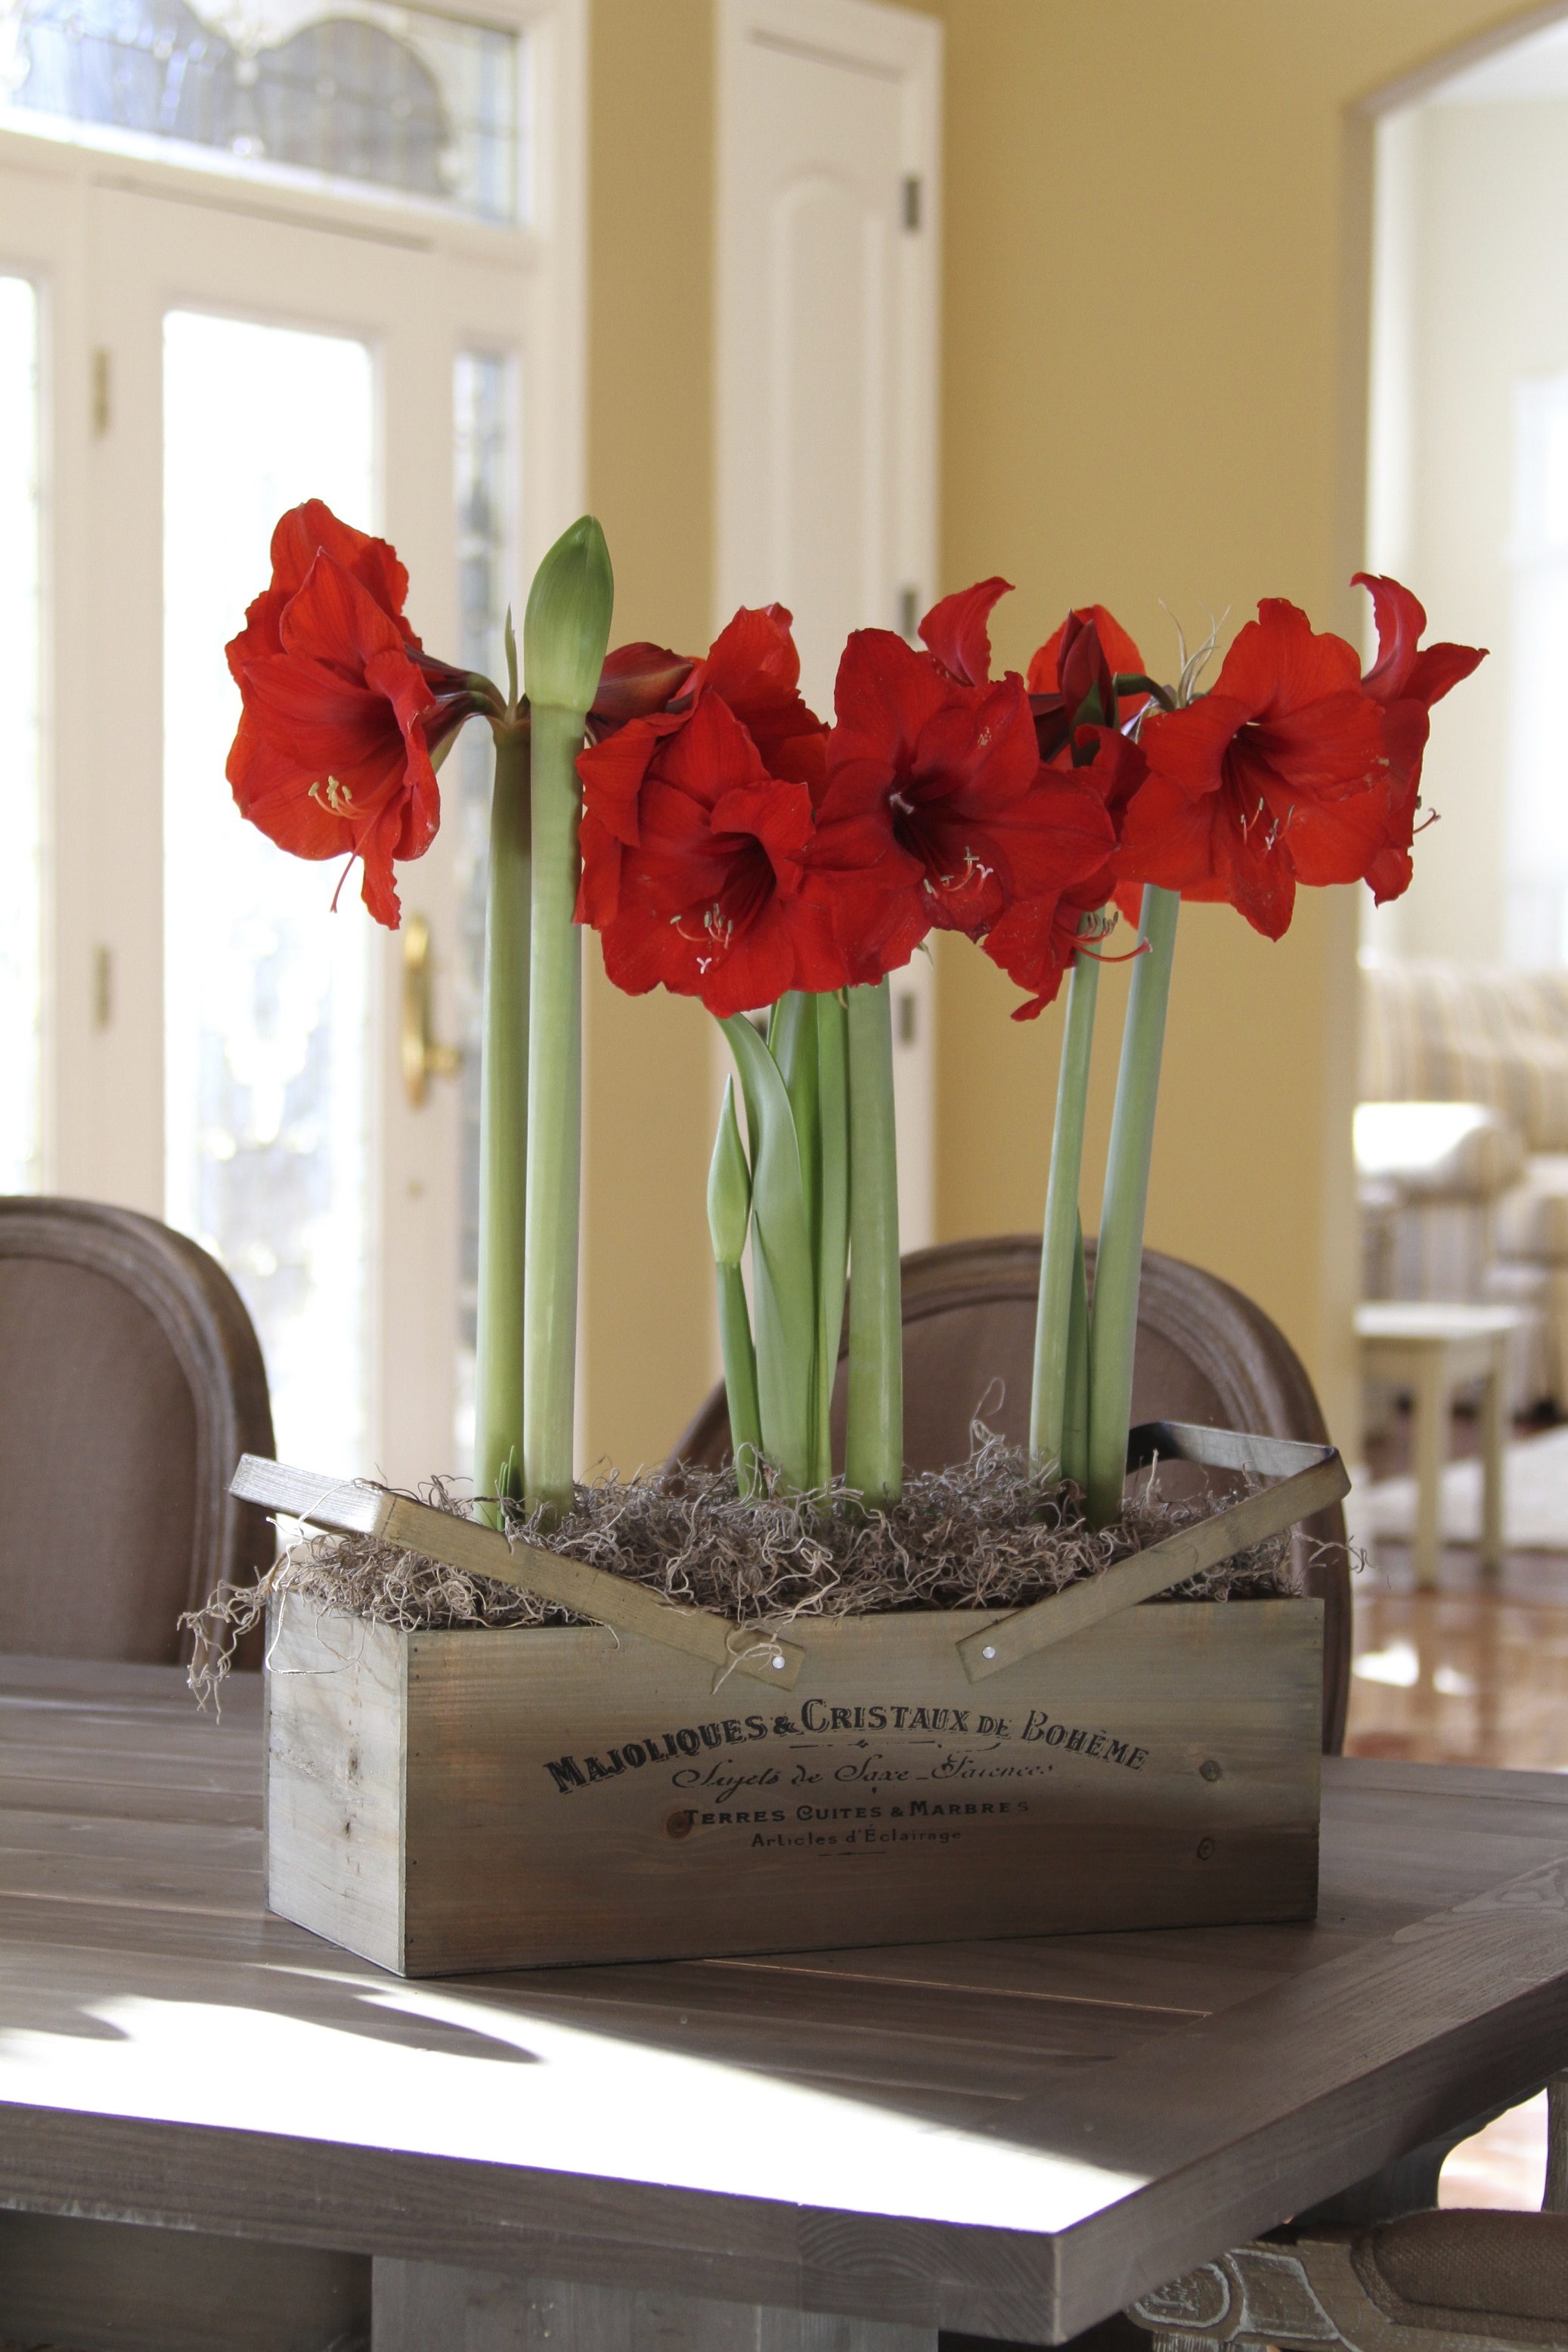 Amaryllis Bulbs are easy to grow and make another great host gift.